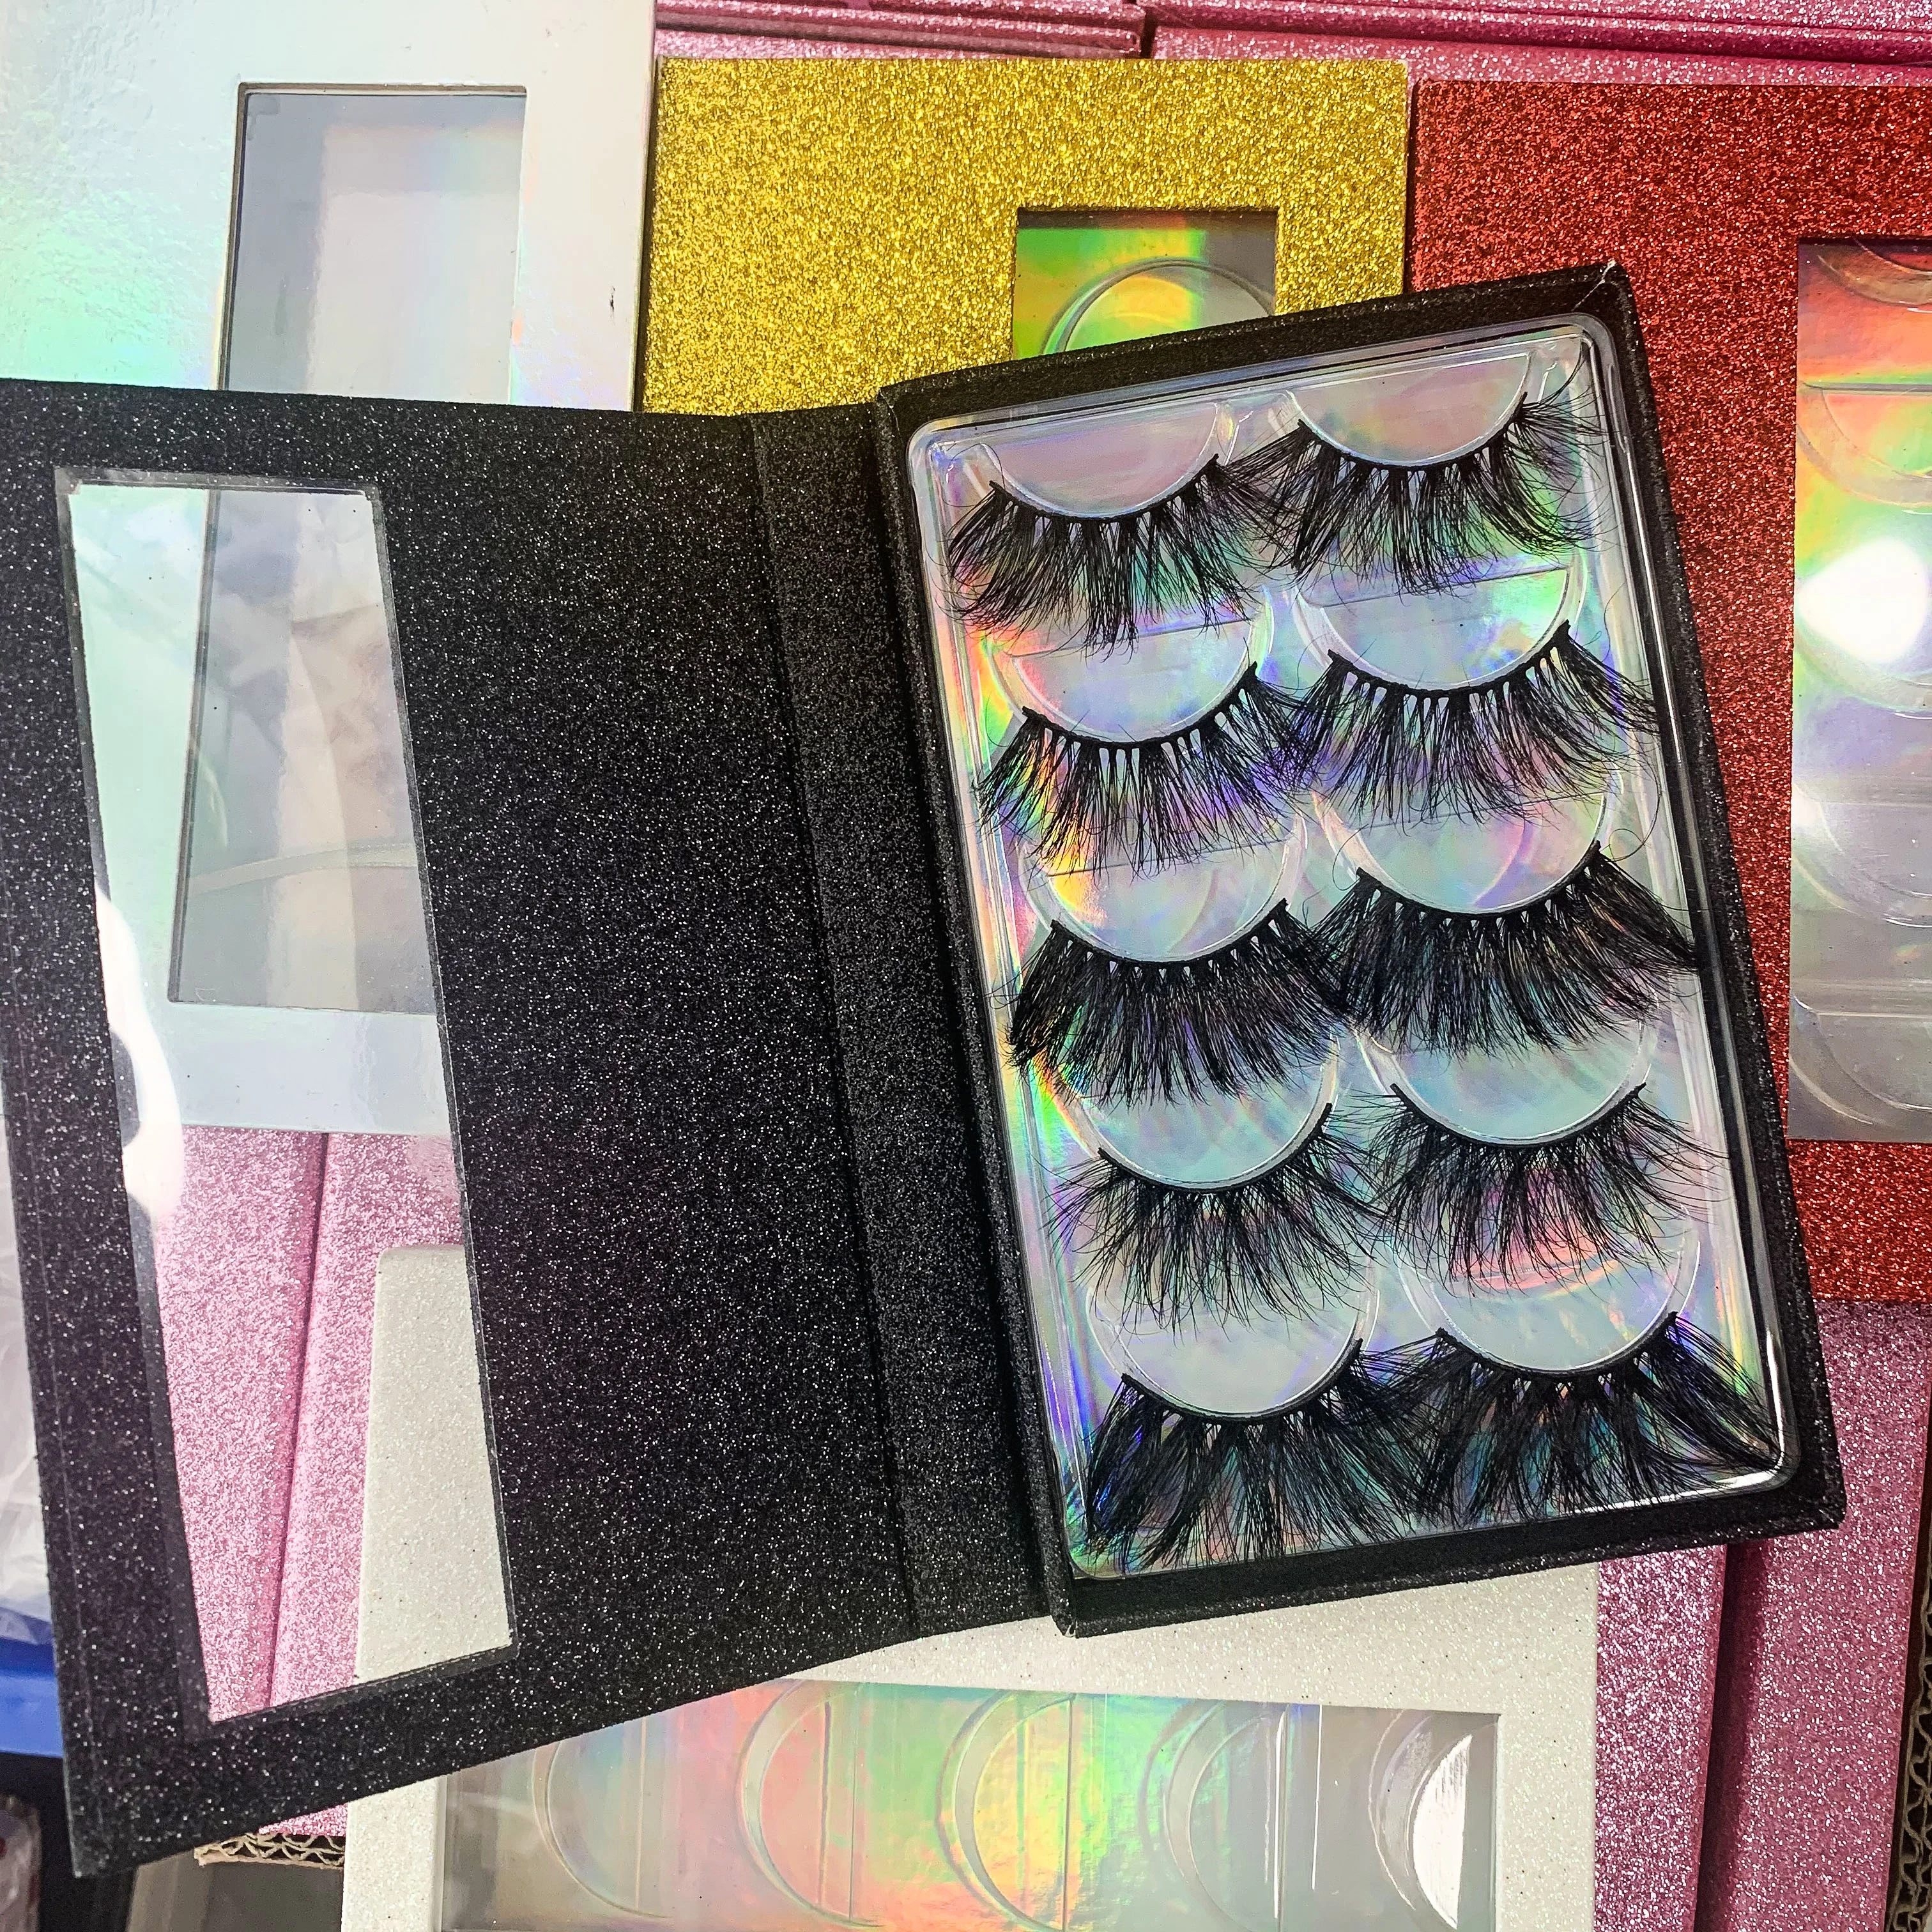 

oem lashes own brand custom packaging box luxury 3d mink eyelash private label ready to ship lash display card, Natural black, color lashes